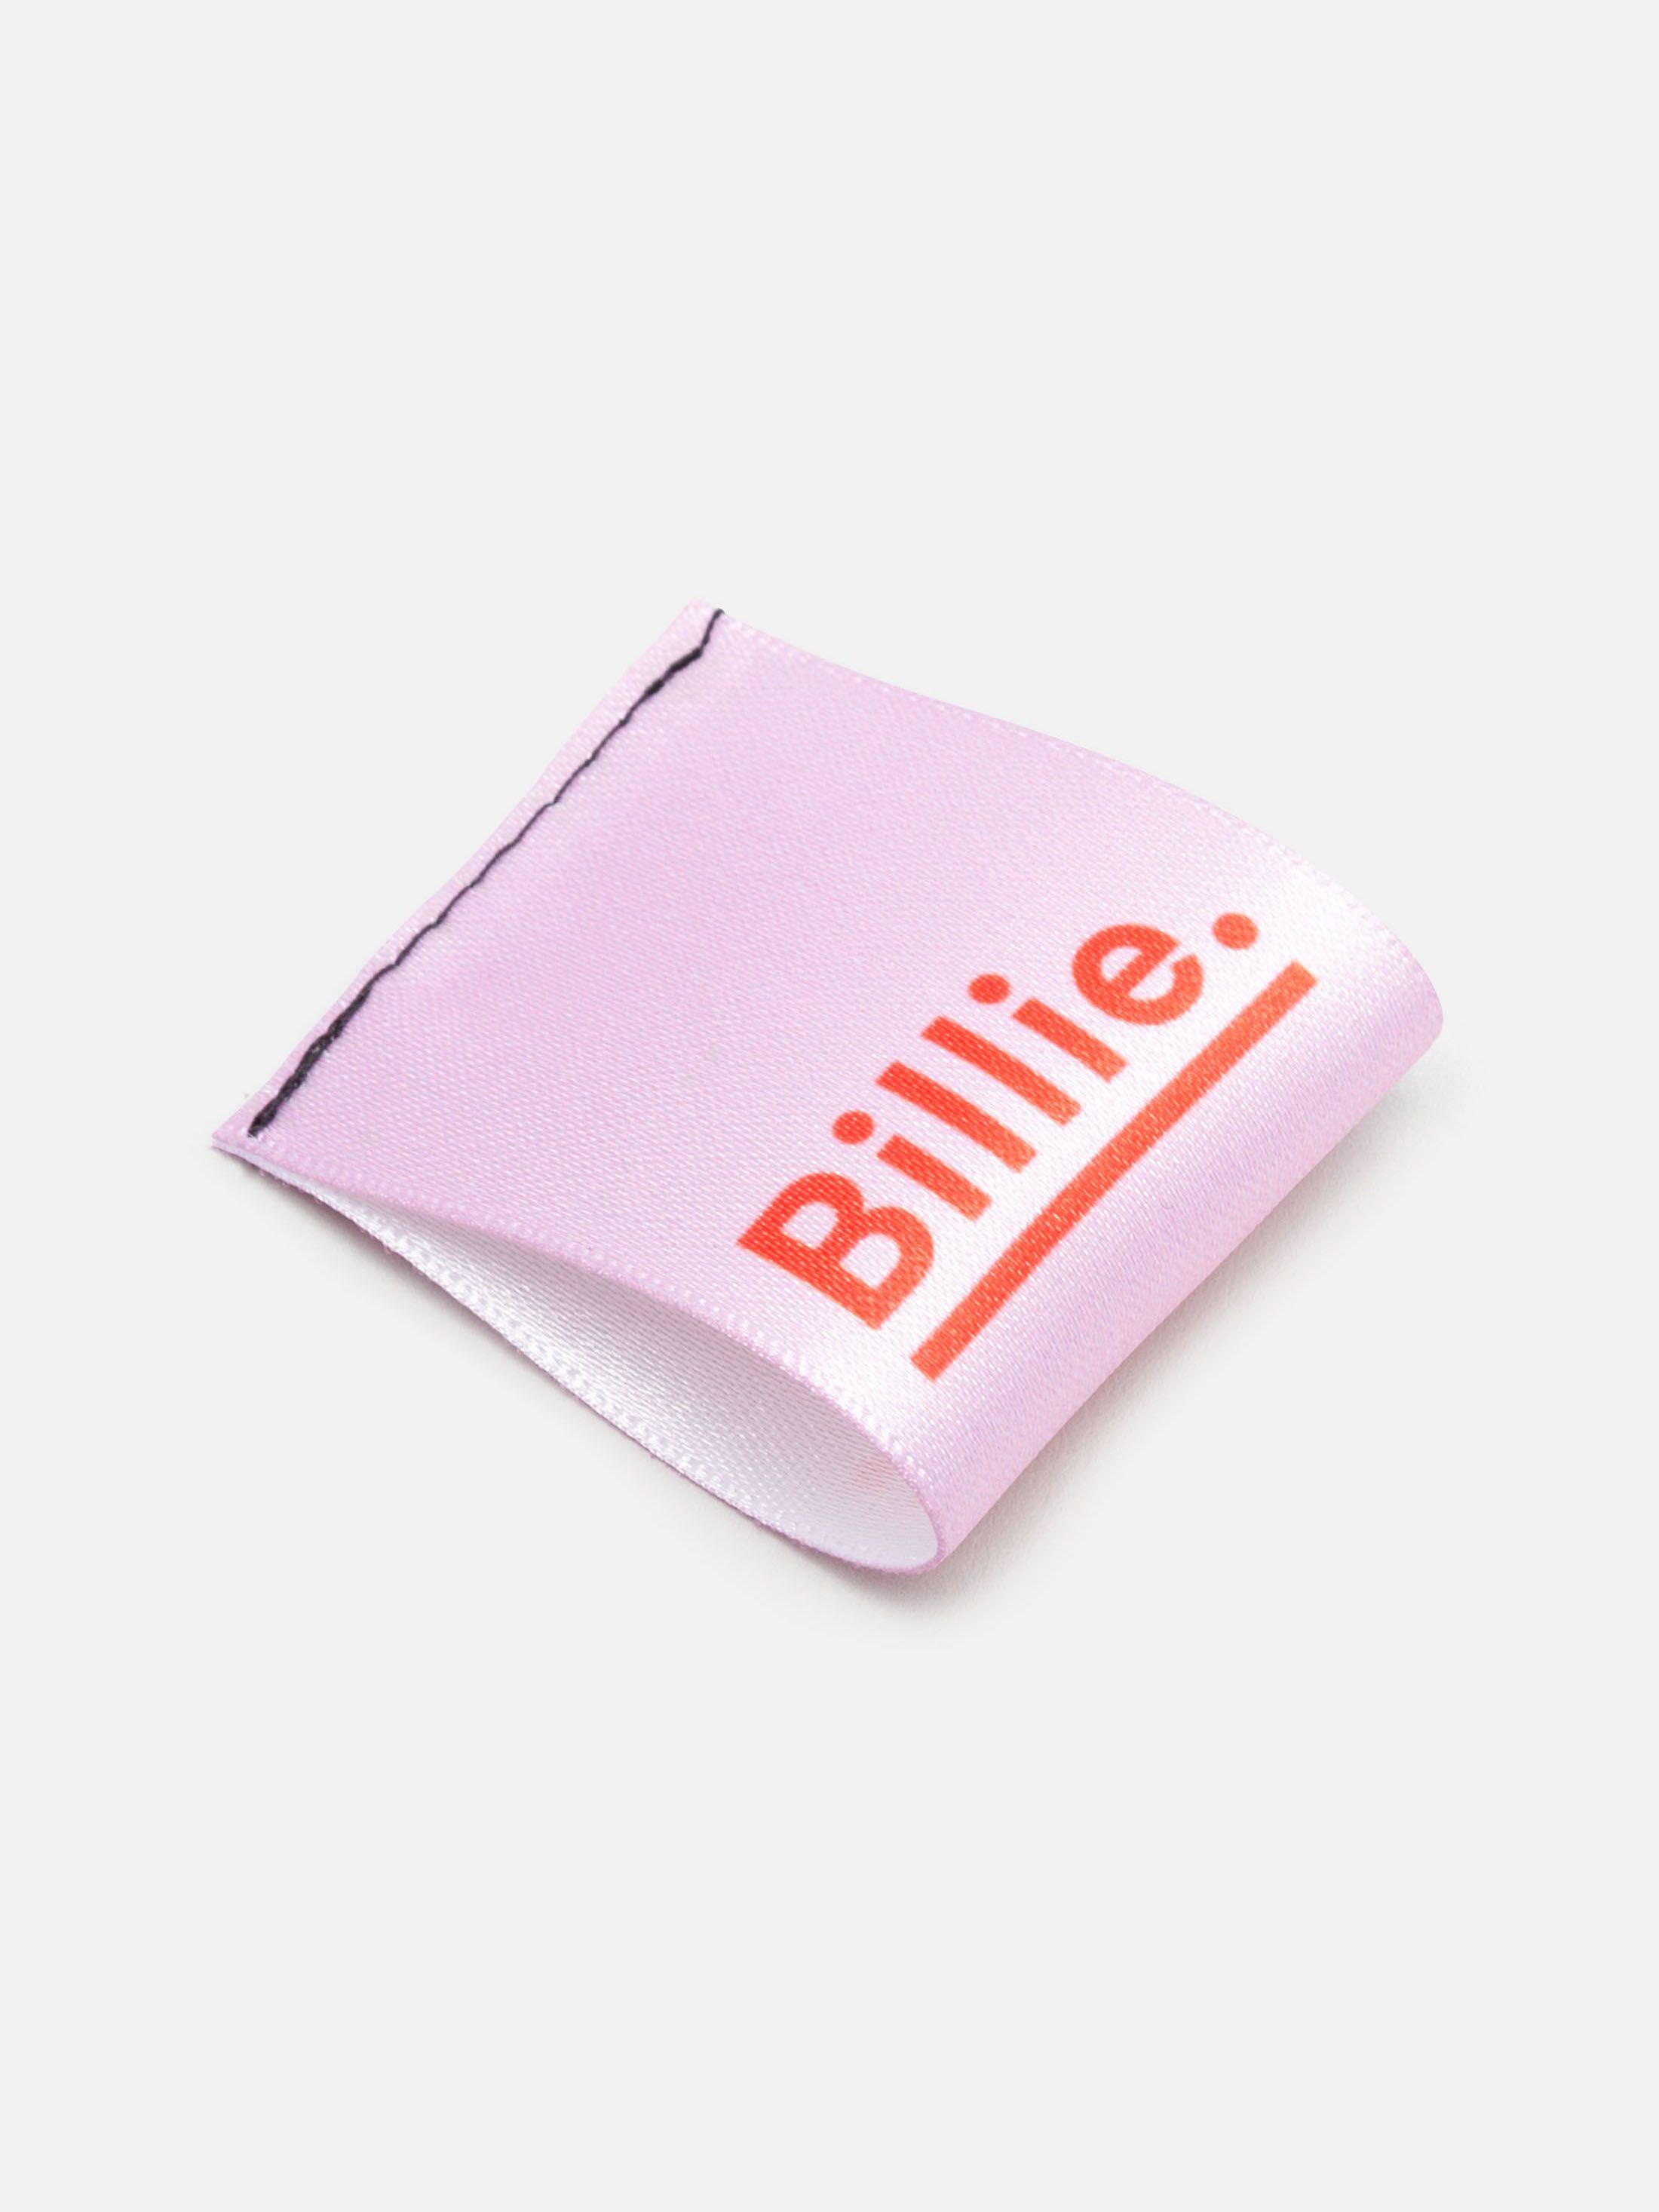 woven labels for handmade items UK